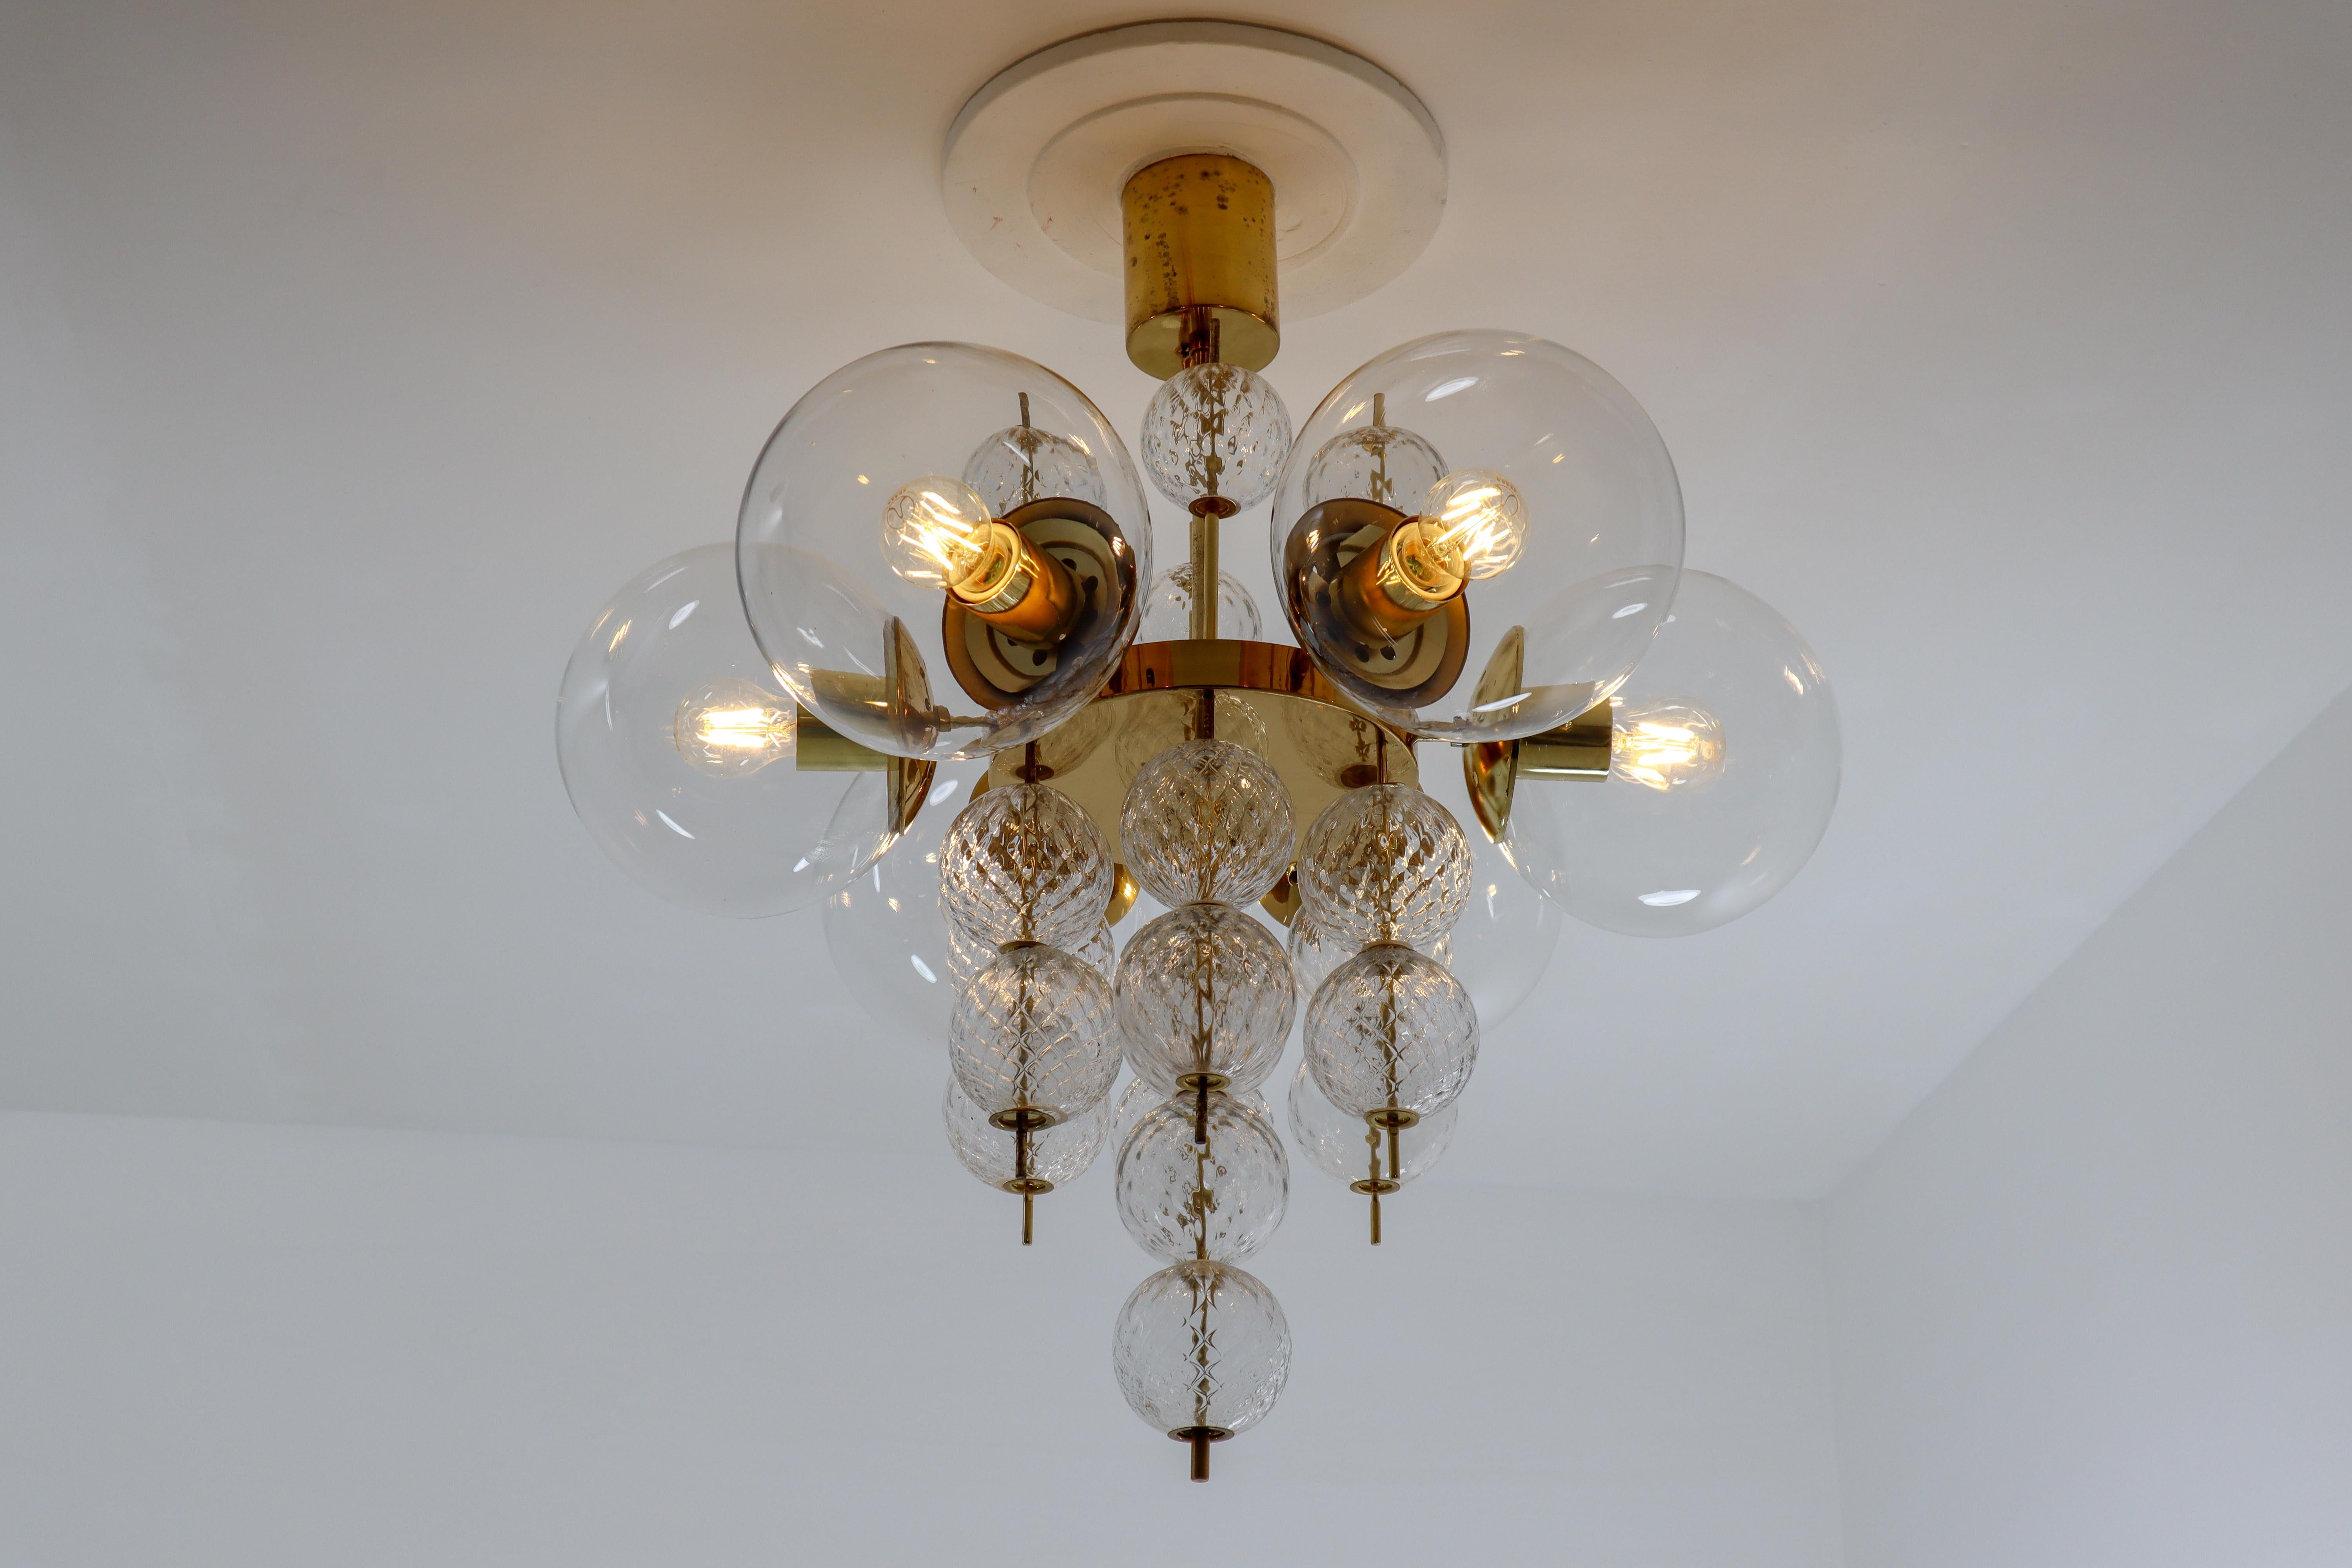 Midcentury Chandeliers with Brass Fixture and Hand-Blown Glass, Europe 1970s In Good Condition For Sale In Almelo, NL